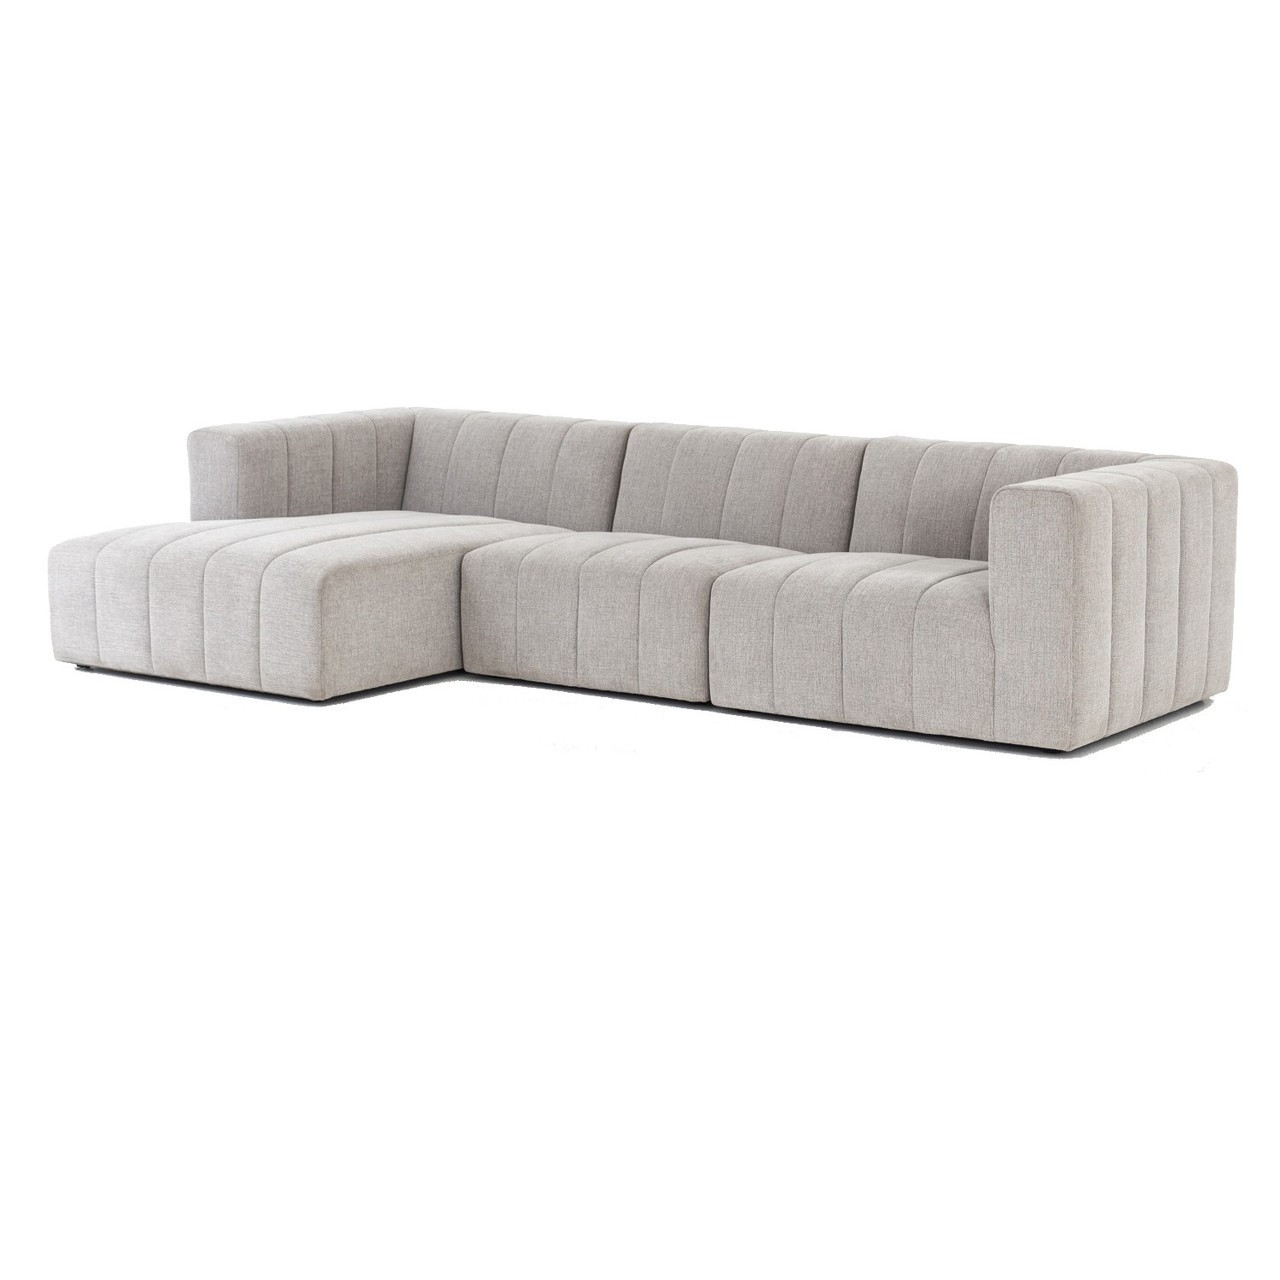 Featured image of post Channel Tufted Sectional / #polyvore #home #furniture #sofas #tufted sectional #cream sofa #linen couch #beige tufted sofa #tufted couch.